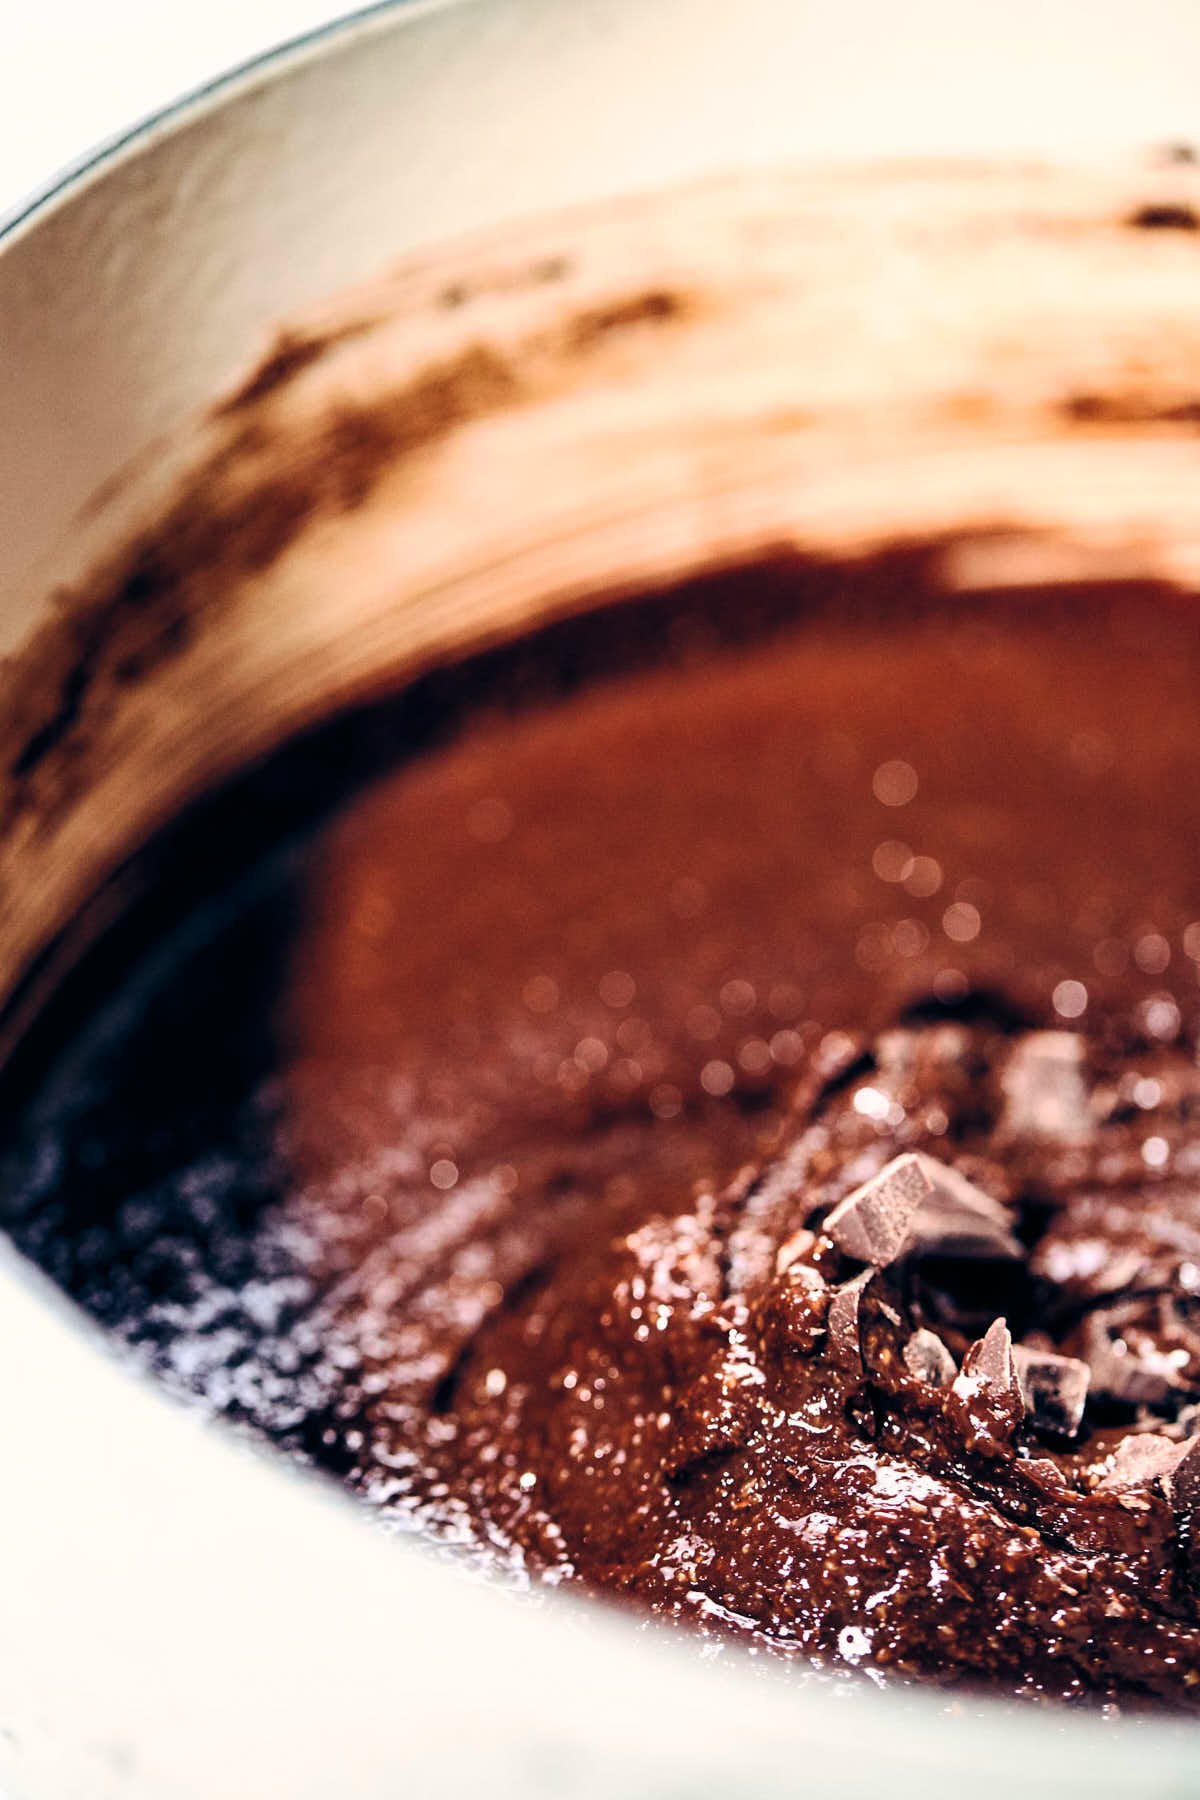 Chocolate being melted down in a dutch oven